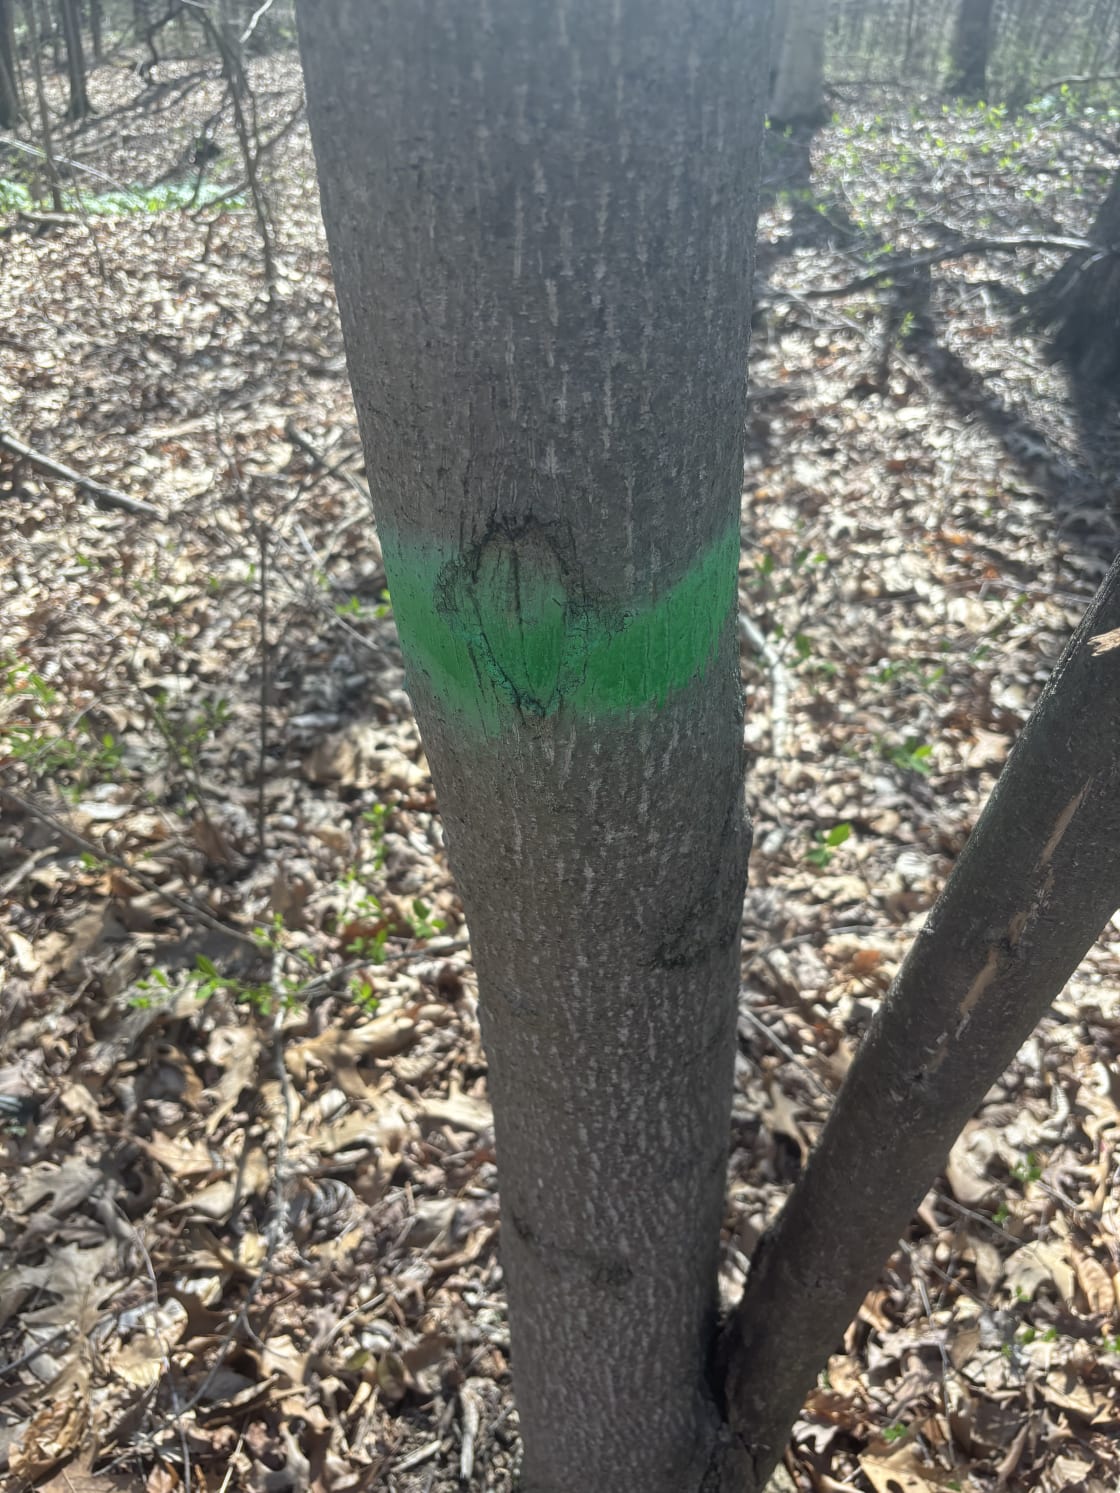 If you look carefully, some trees along the walking path are marked with this green paint. 